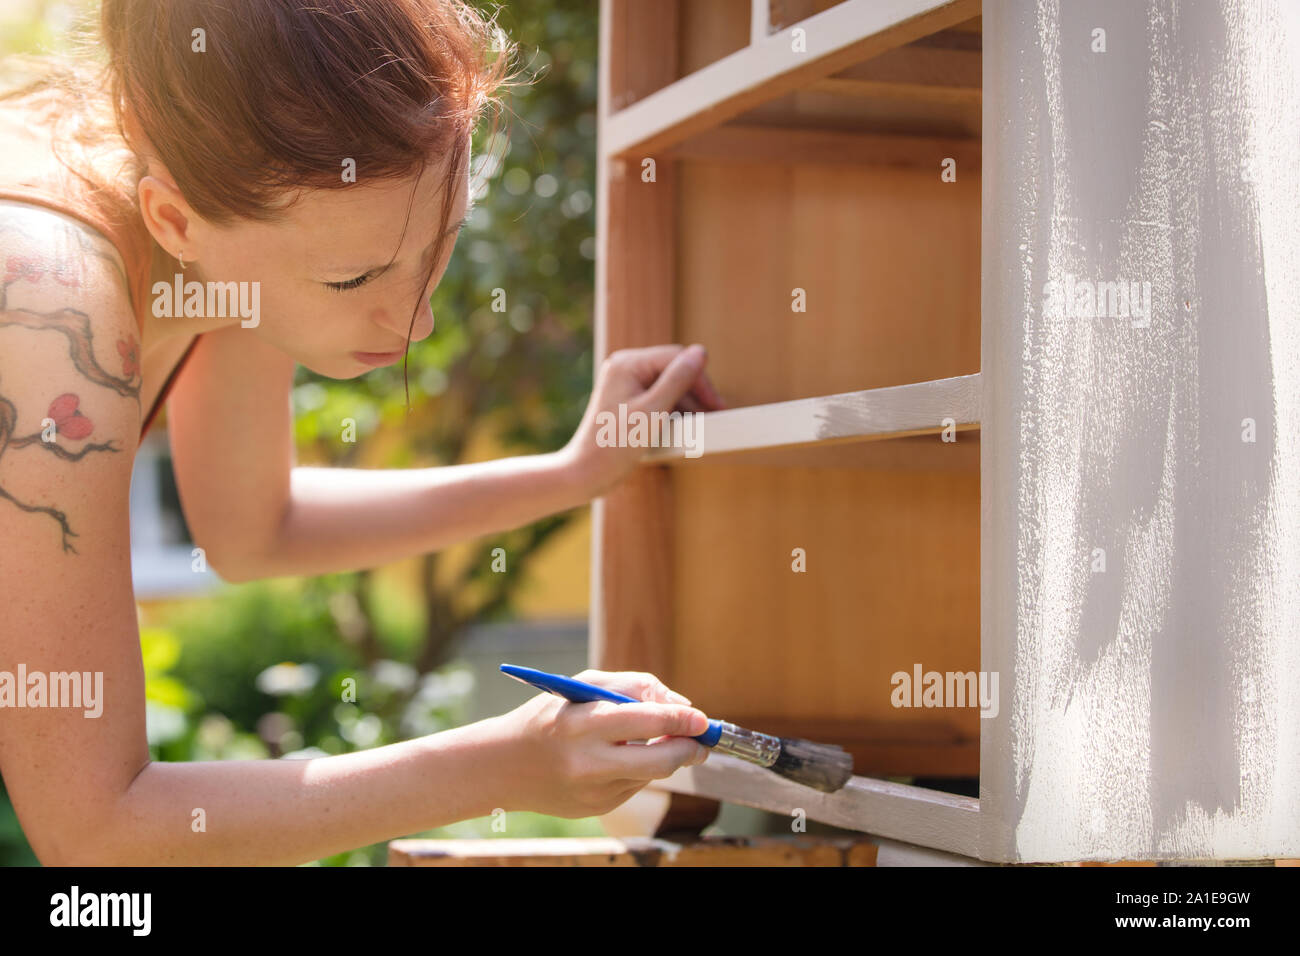 Woman Is Painting An Old Dresser Outdoor In White And Grey Shabby